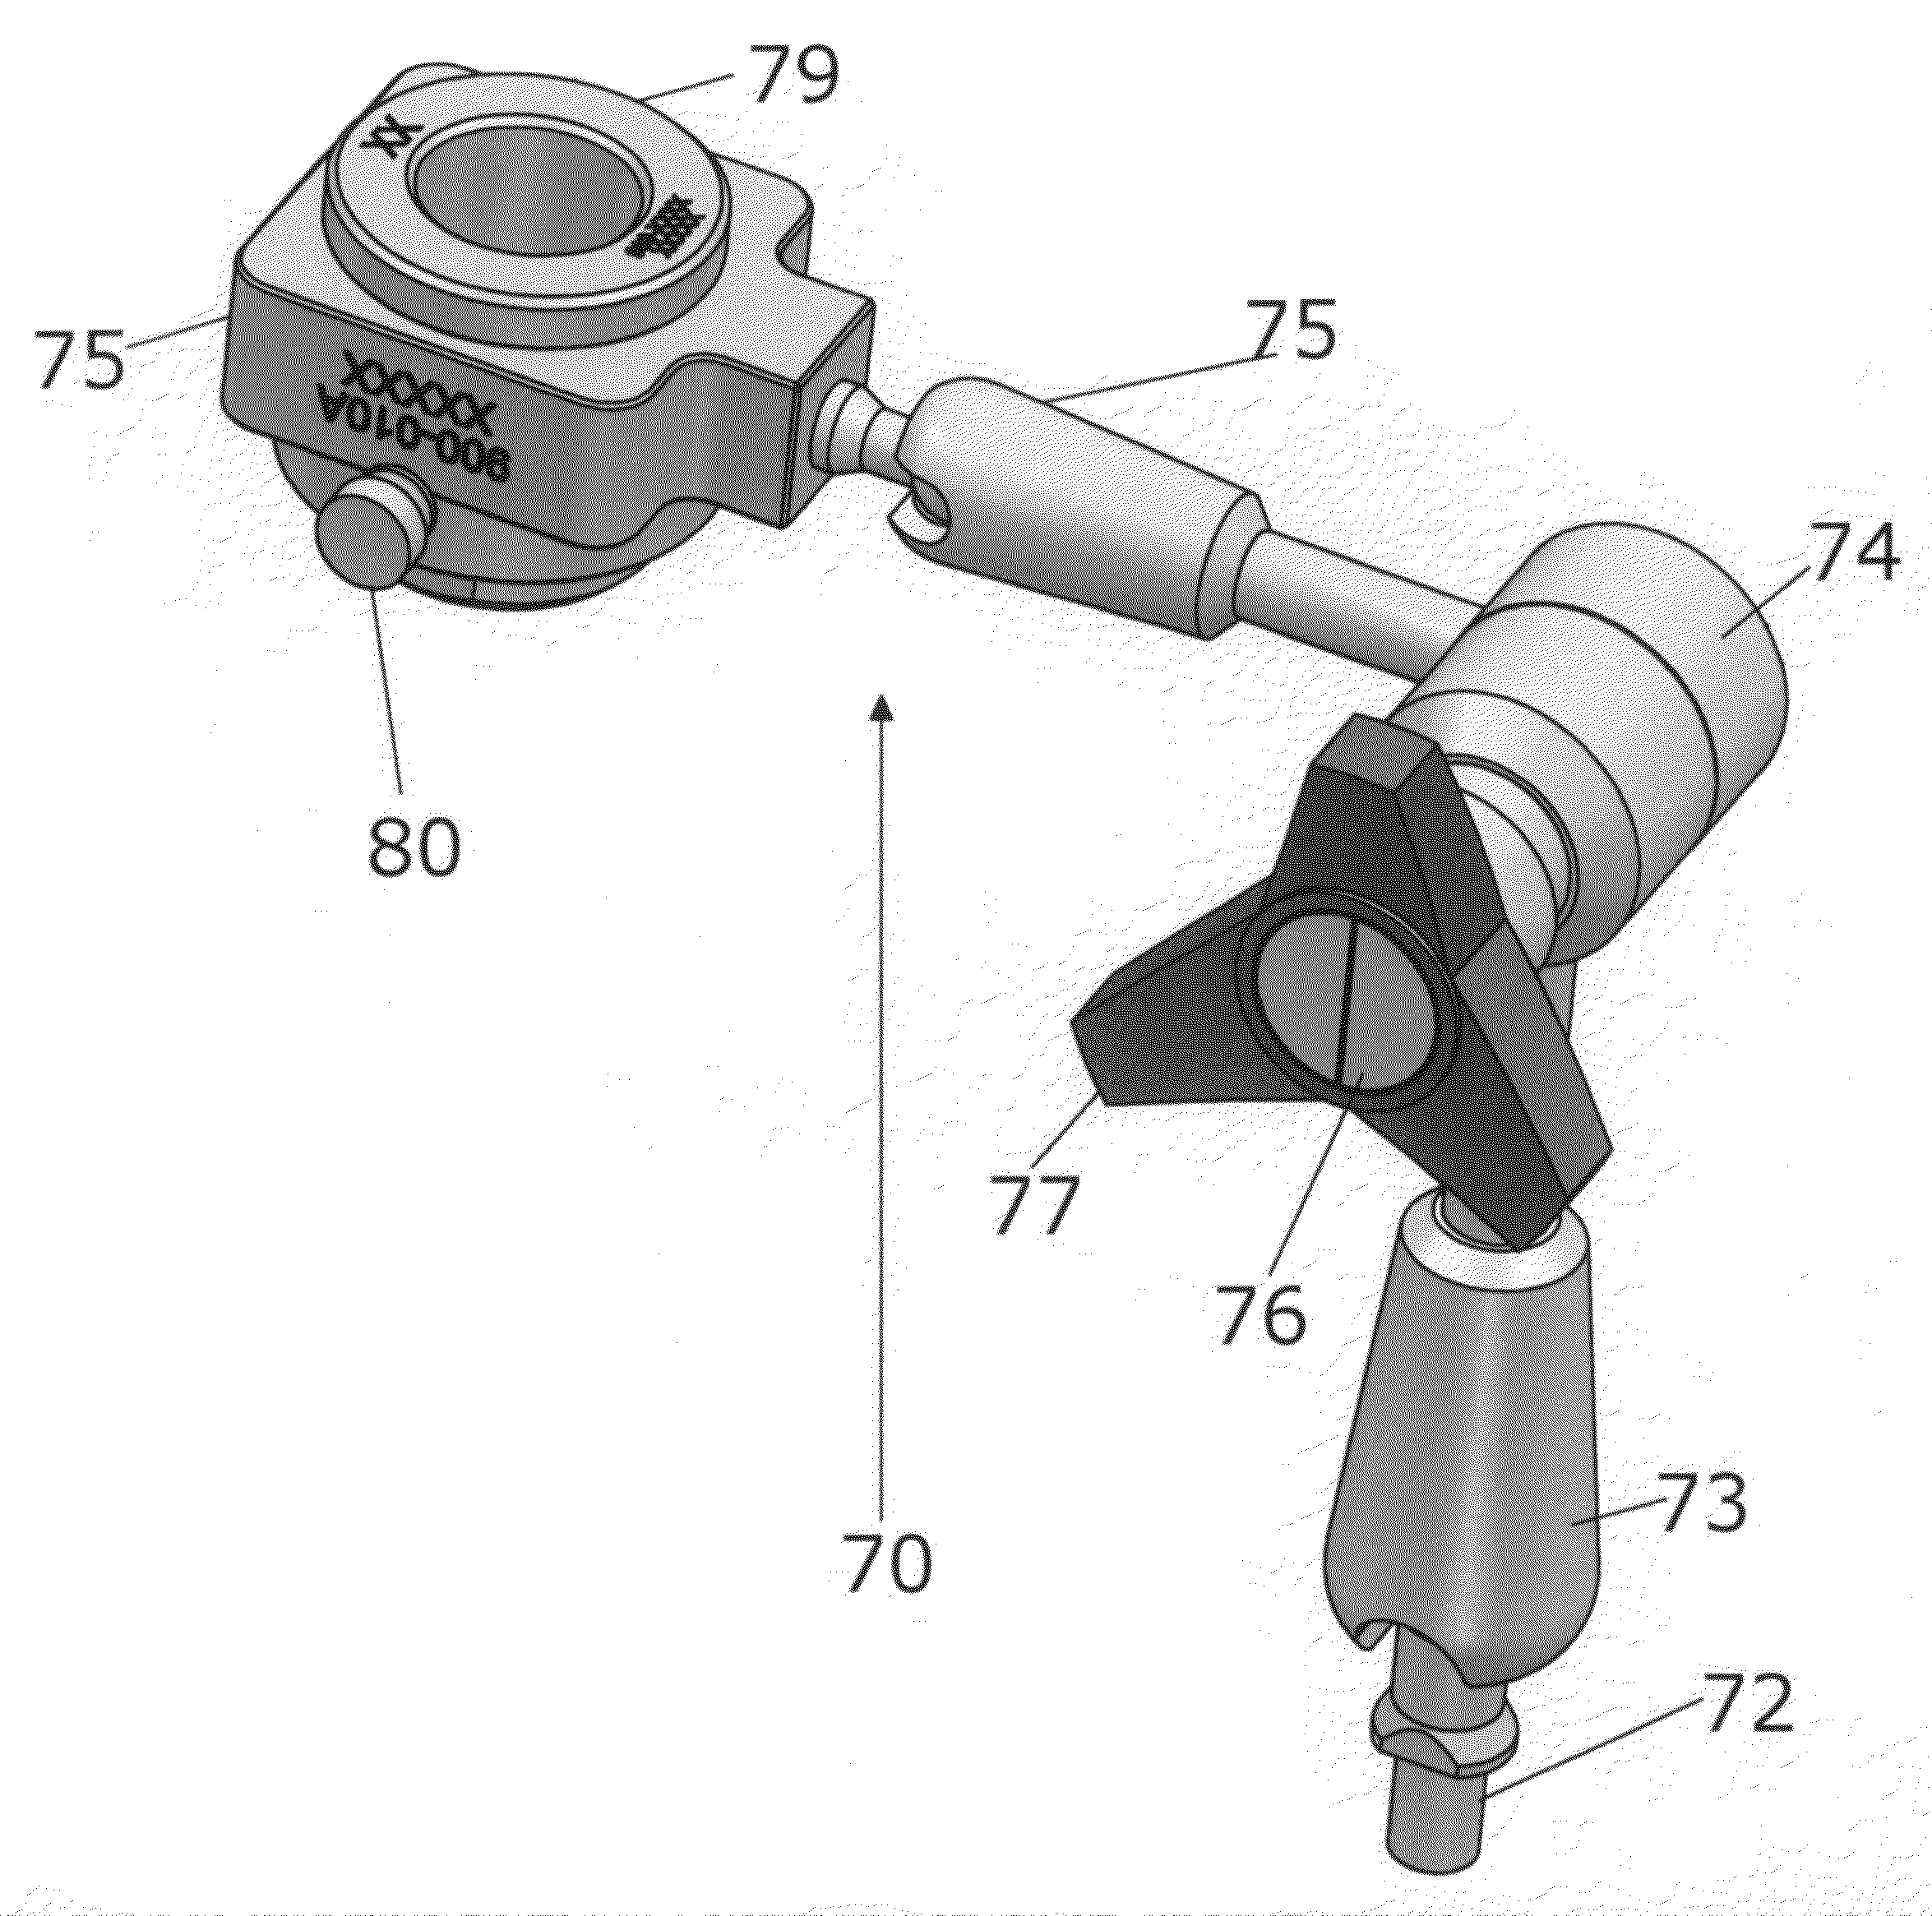 Surgical allograft bone plug cutting tool assembly and method of using same